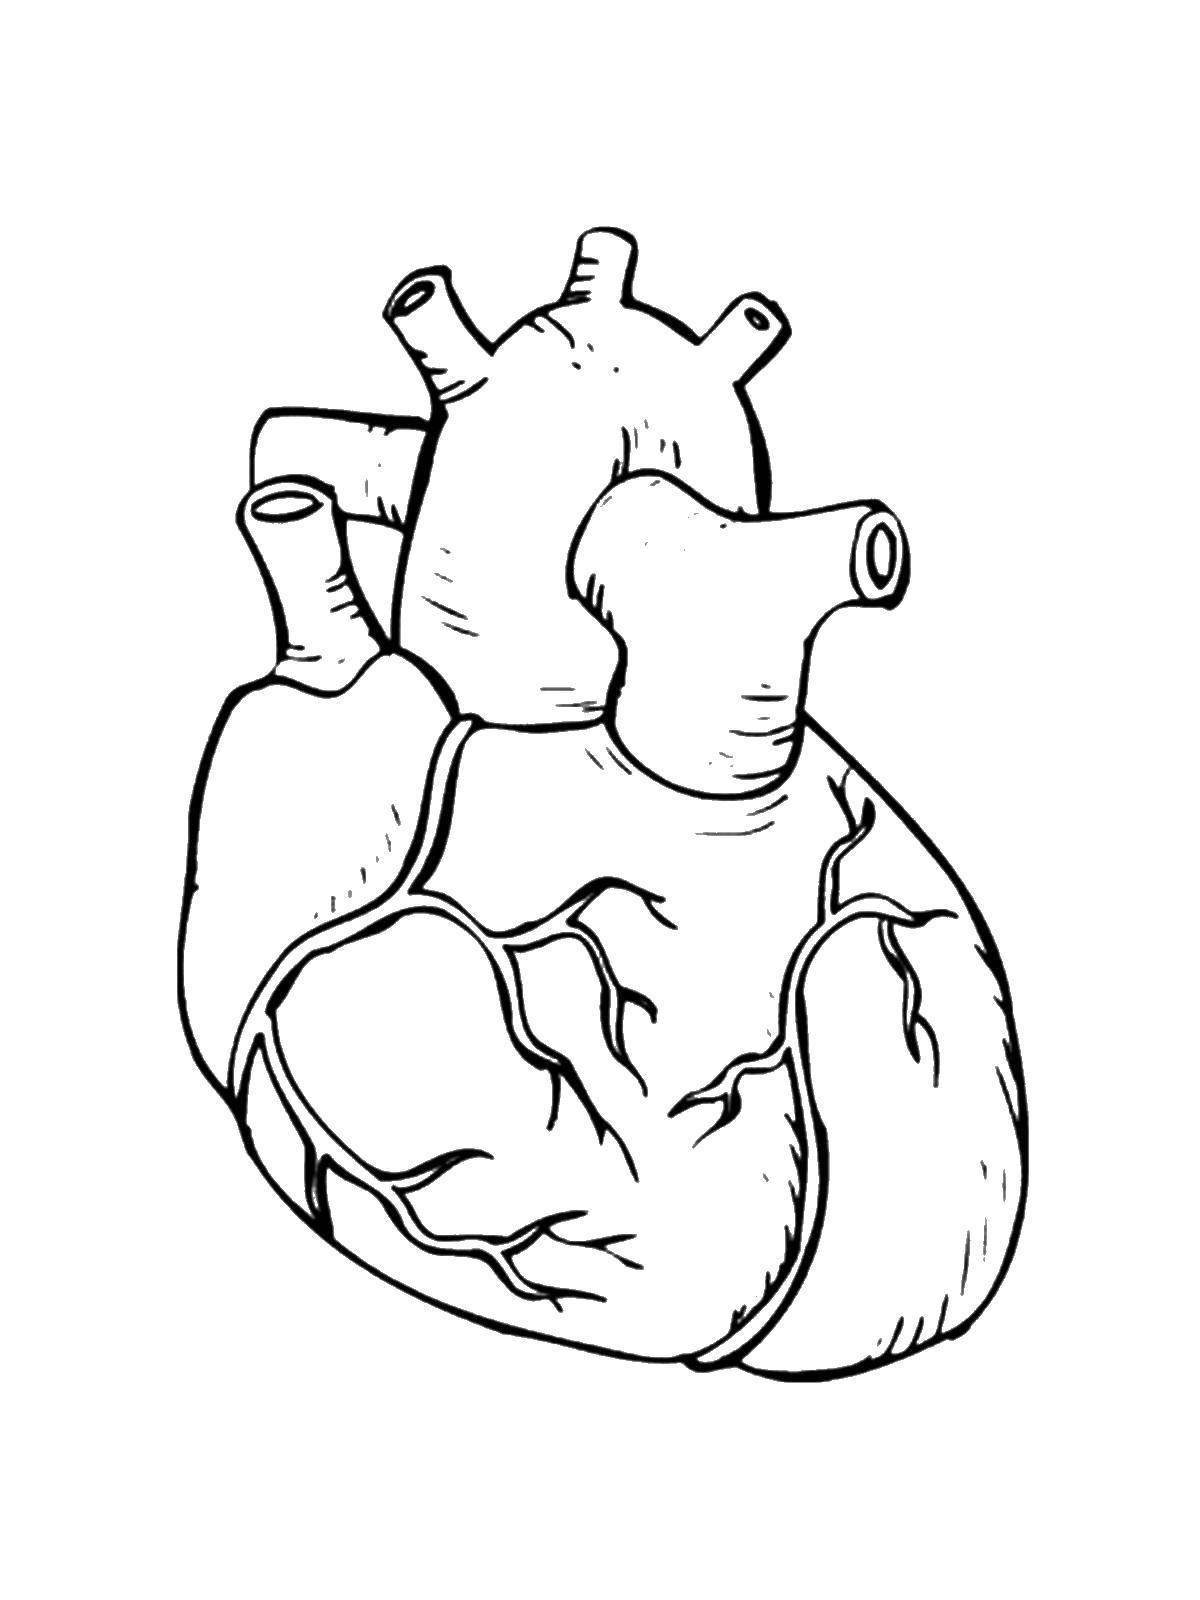 Coloring page peaceful human heart